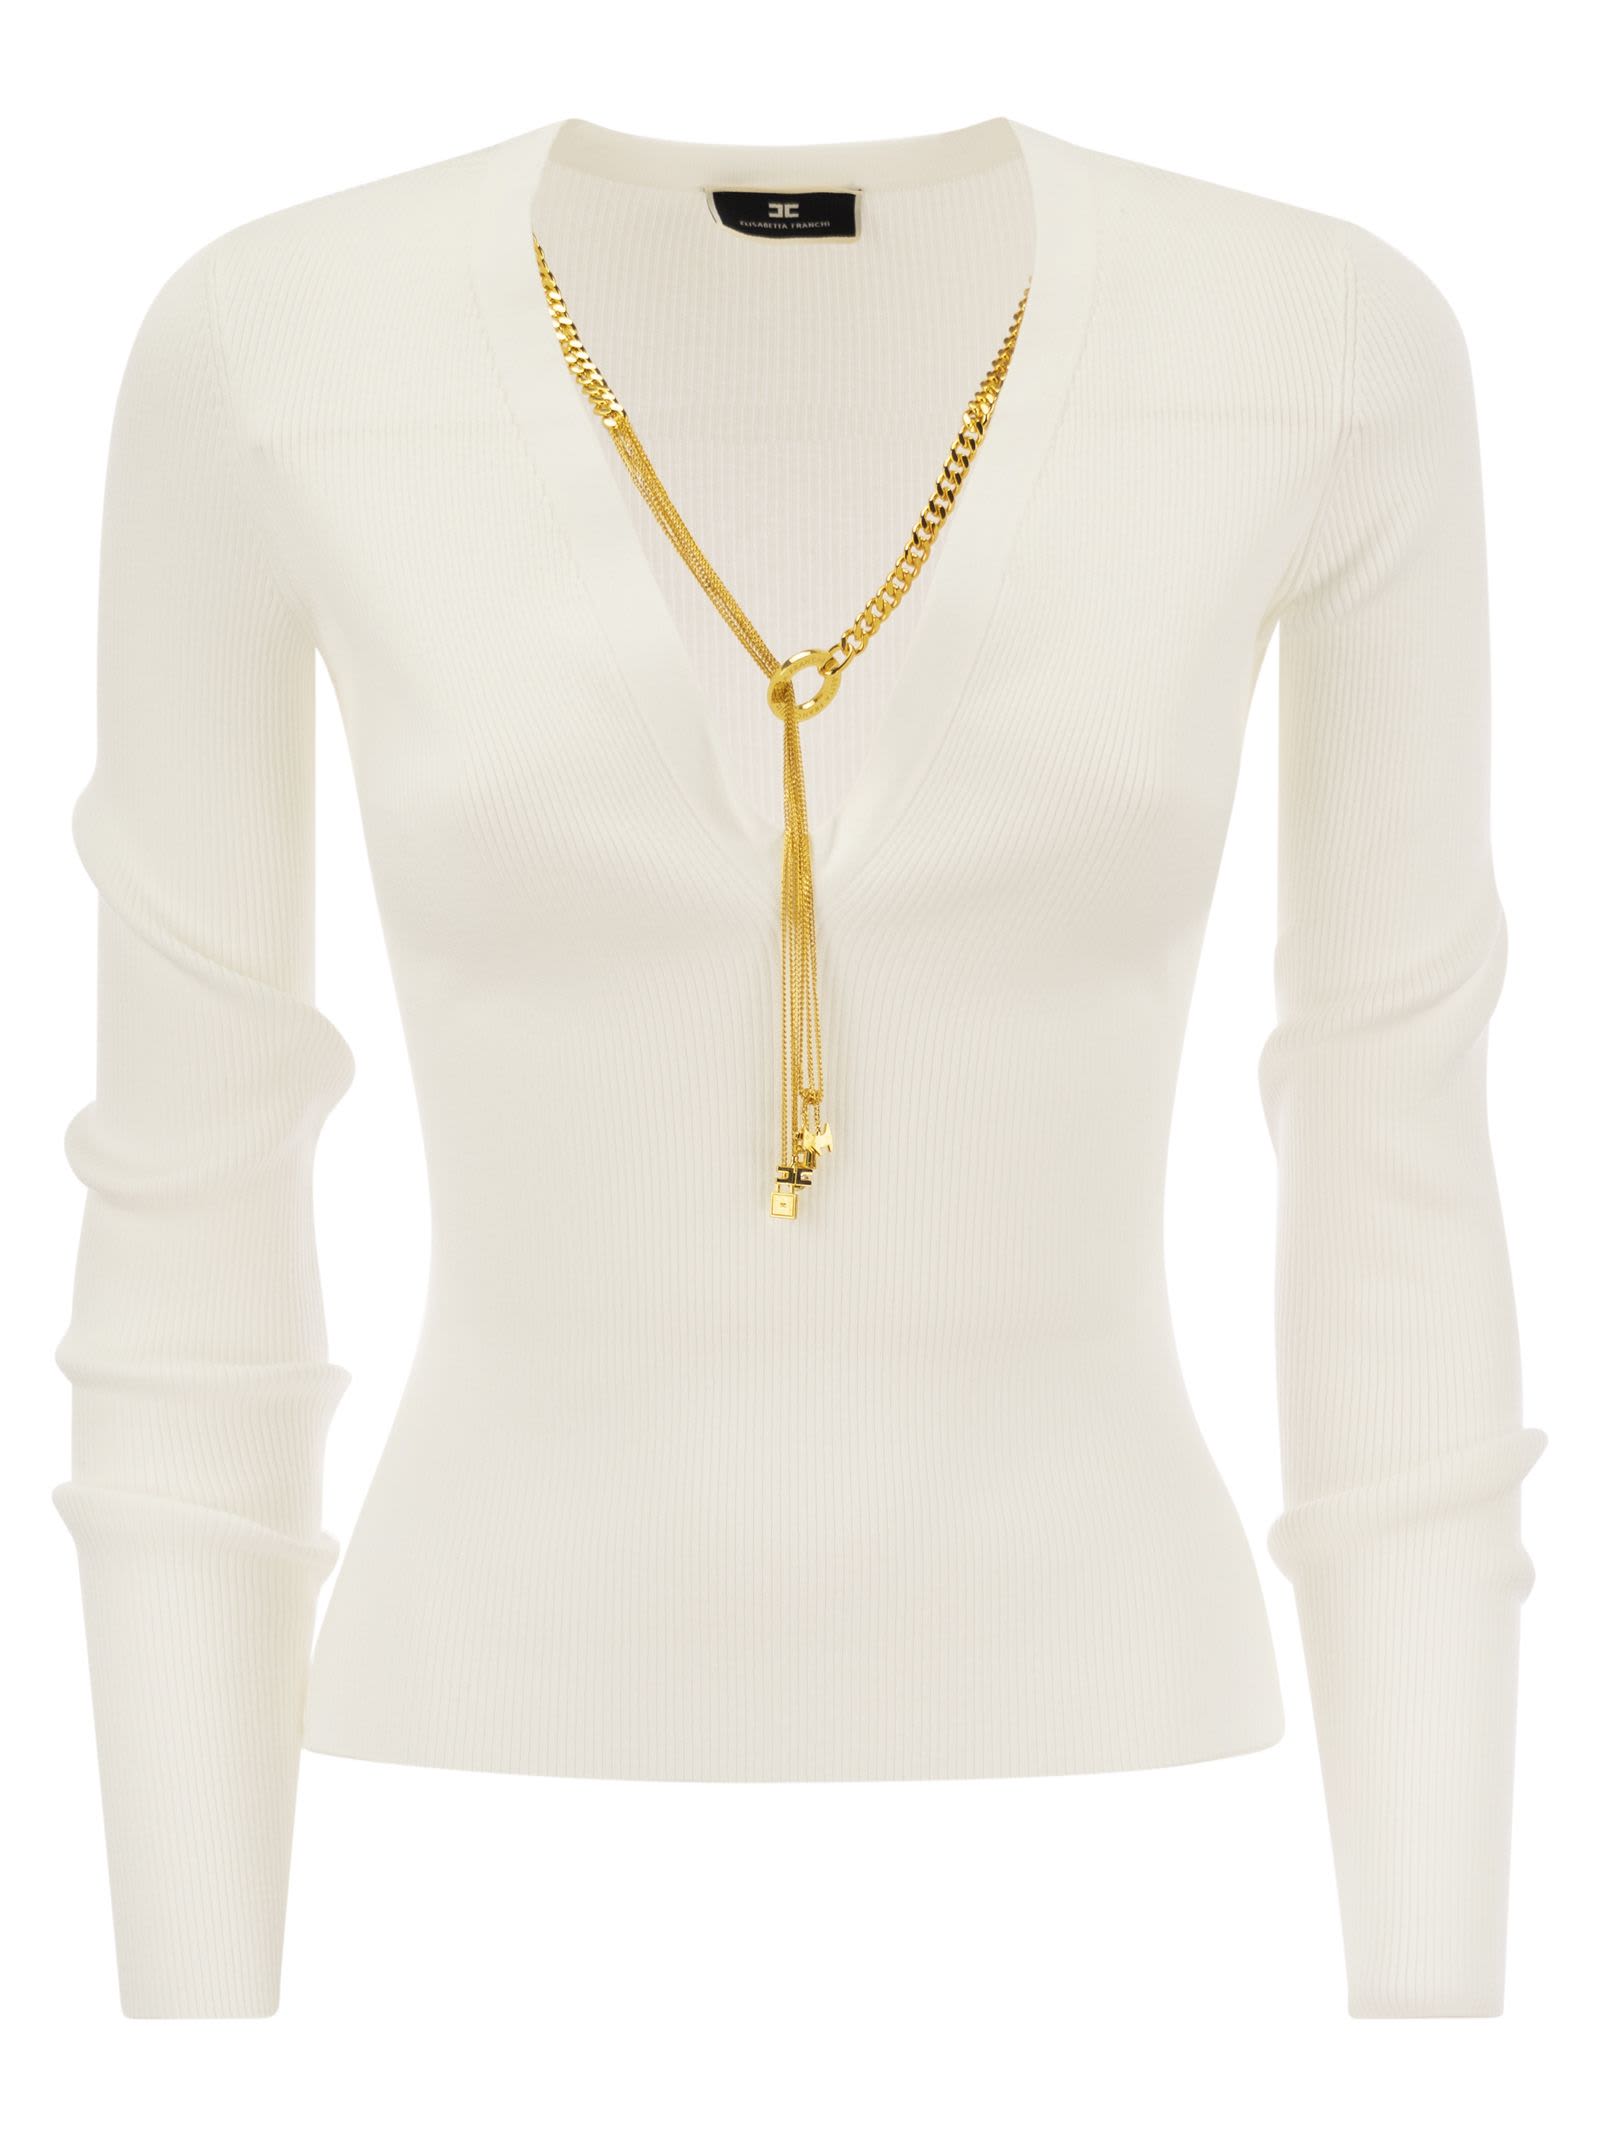 ELISABETTA FRANCHI LONG-SLEEVED RIBBED VISCOSE TOP WITH NECKLACE